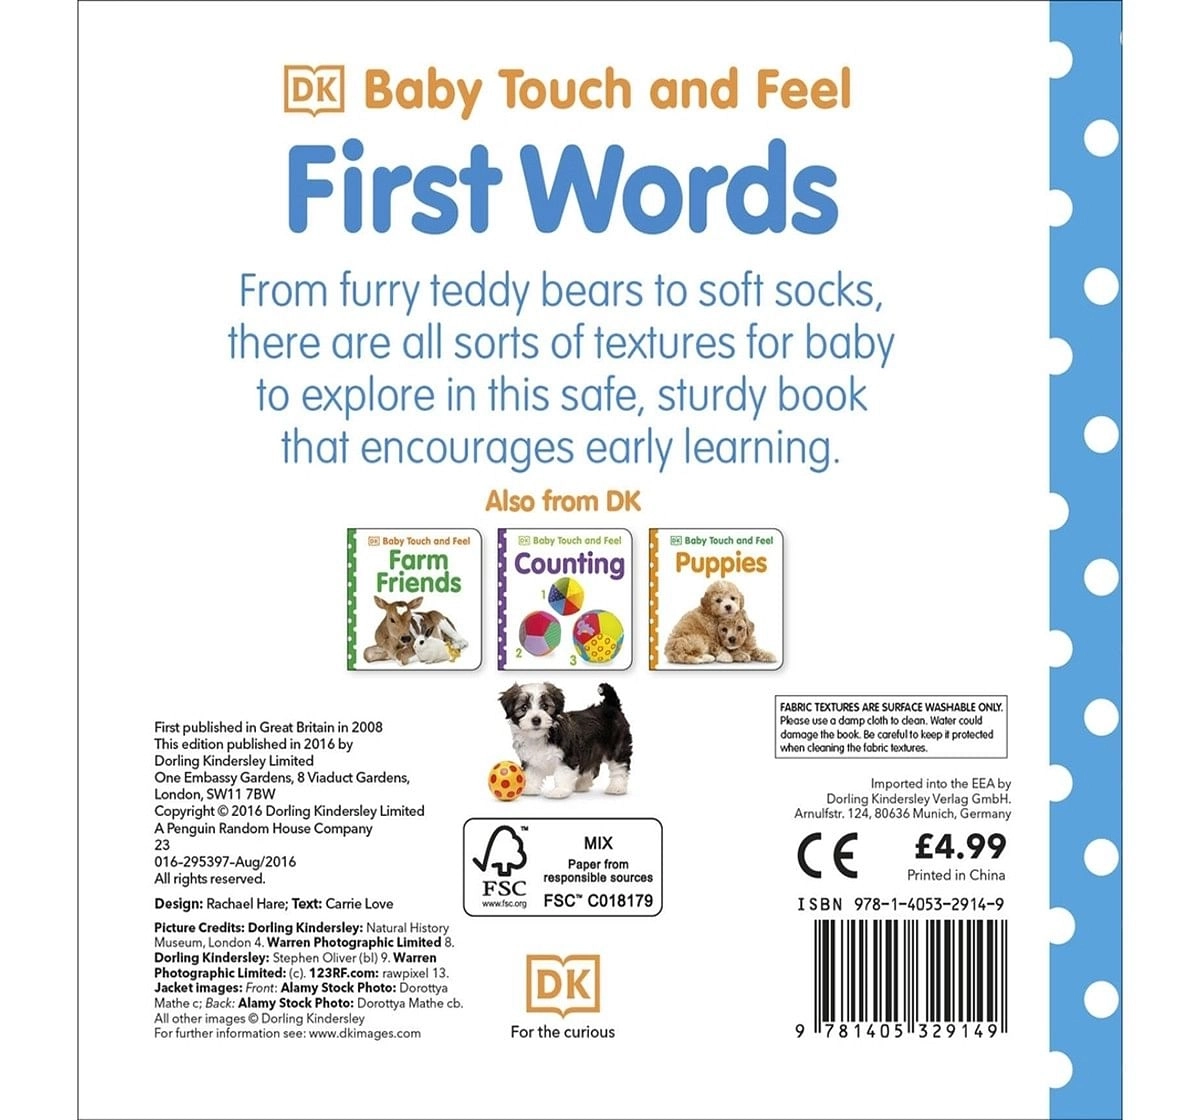 Baby Touch & Feel : First Words, 176 Pages Book by DK Children, Paperback